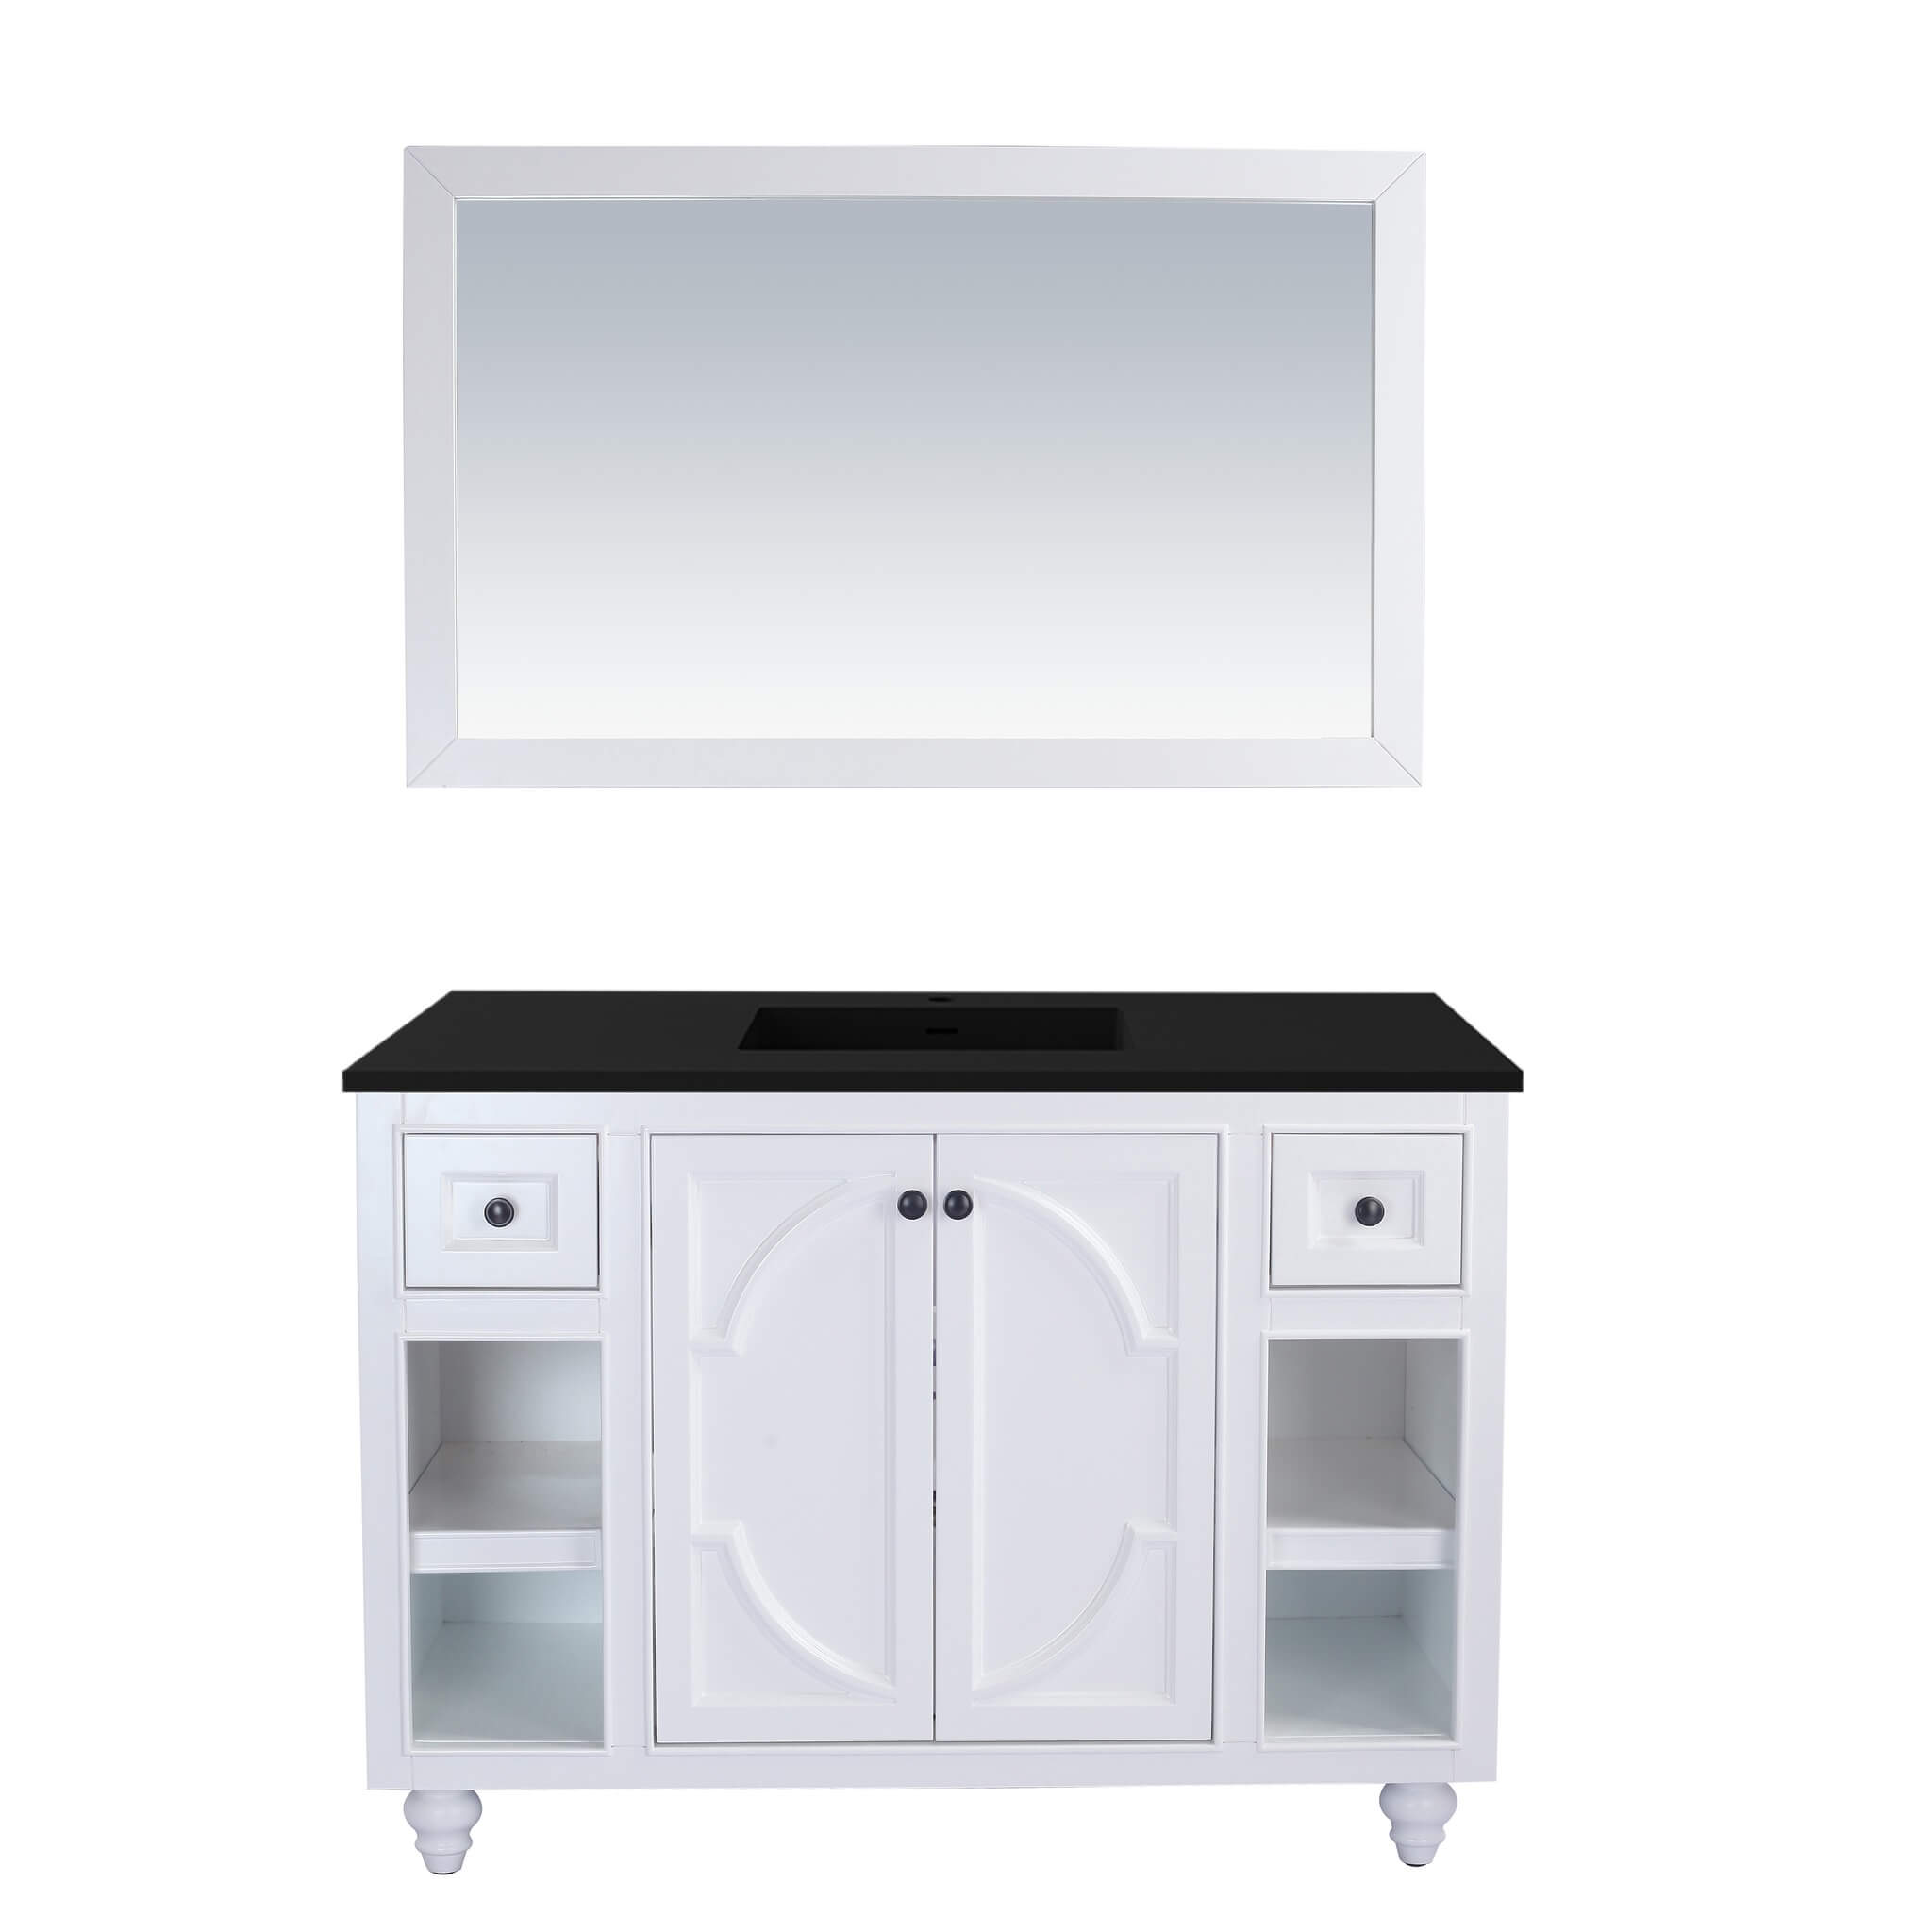 LAVIVA Odyssey 313613-48W-MB 48" Single Bathroom Vanity in White with Matte Black VIVA Stone Surface, Integrated Sink, Front View